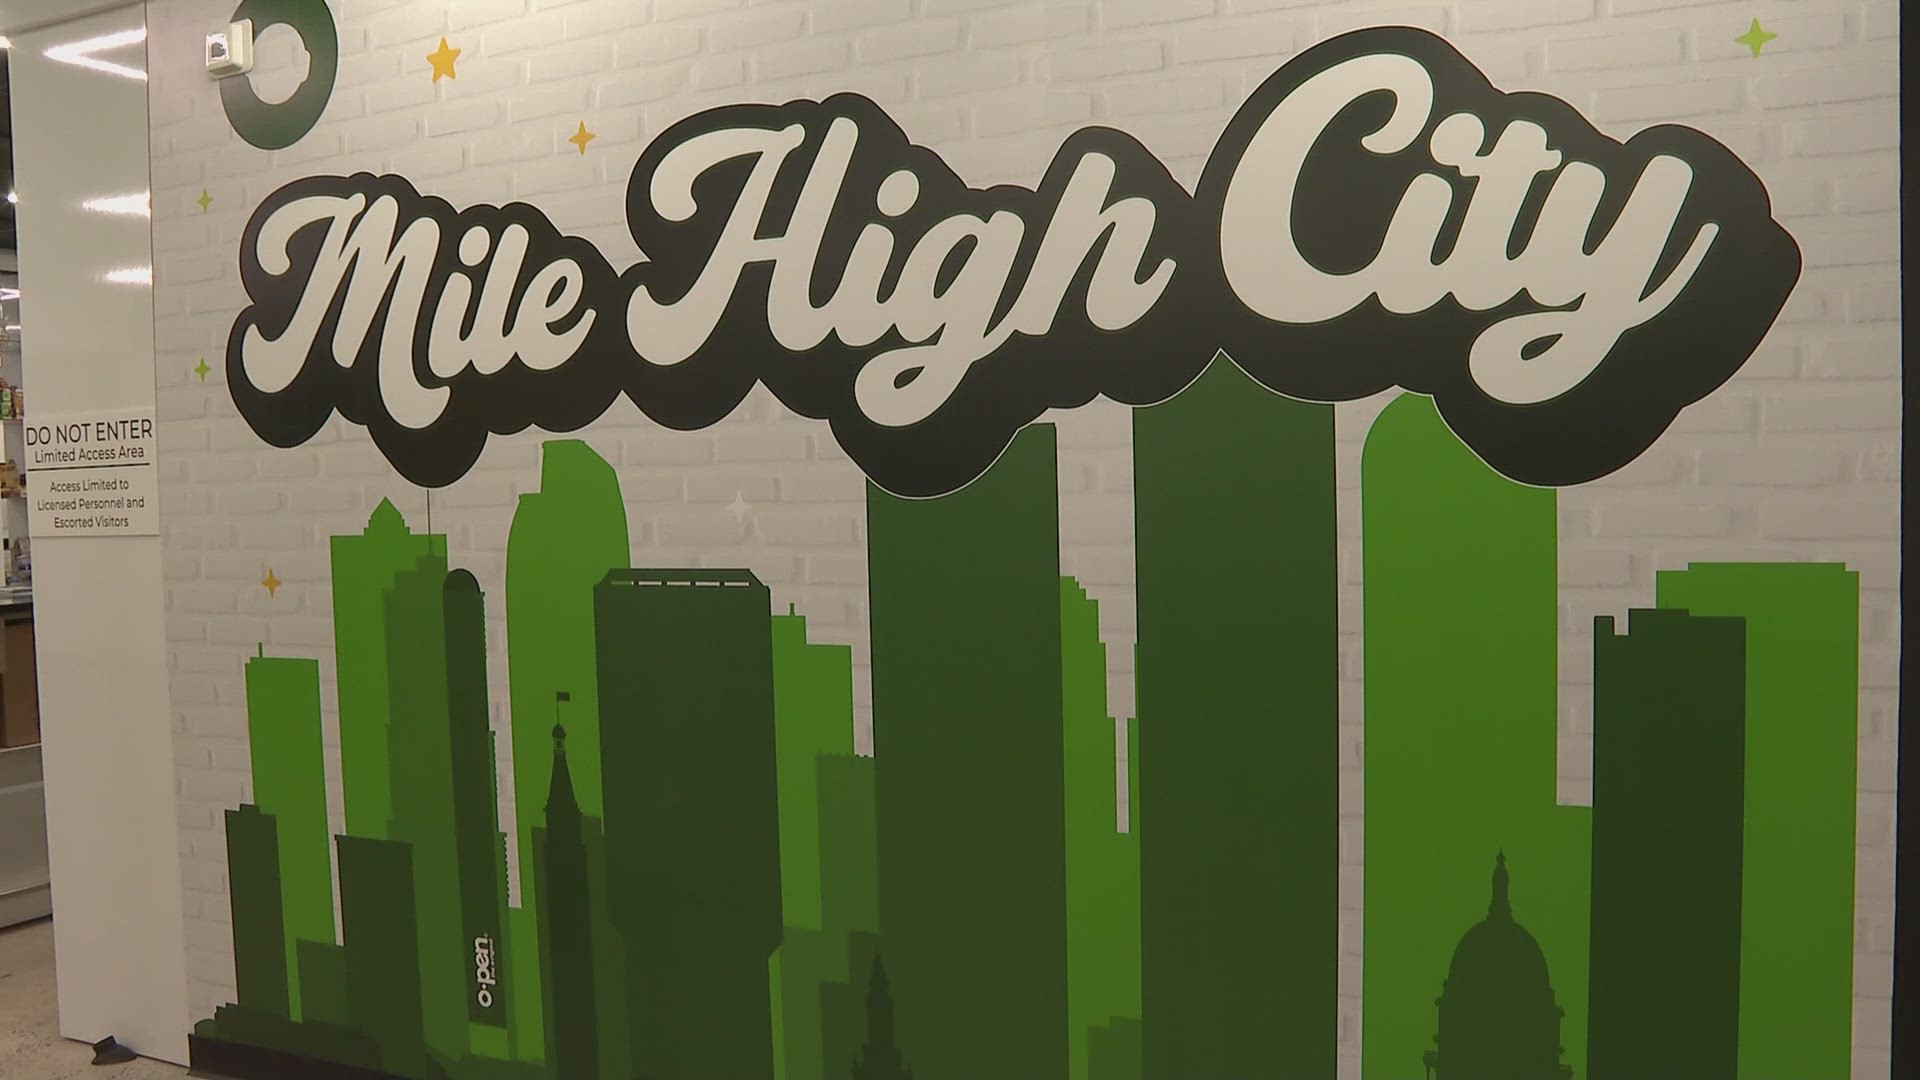 JARS Cannabis is the first Denver cannabis company to receive all of the city's "badges" for positive community impact.